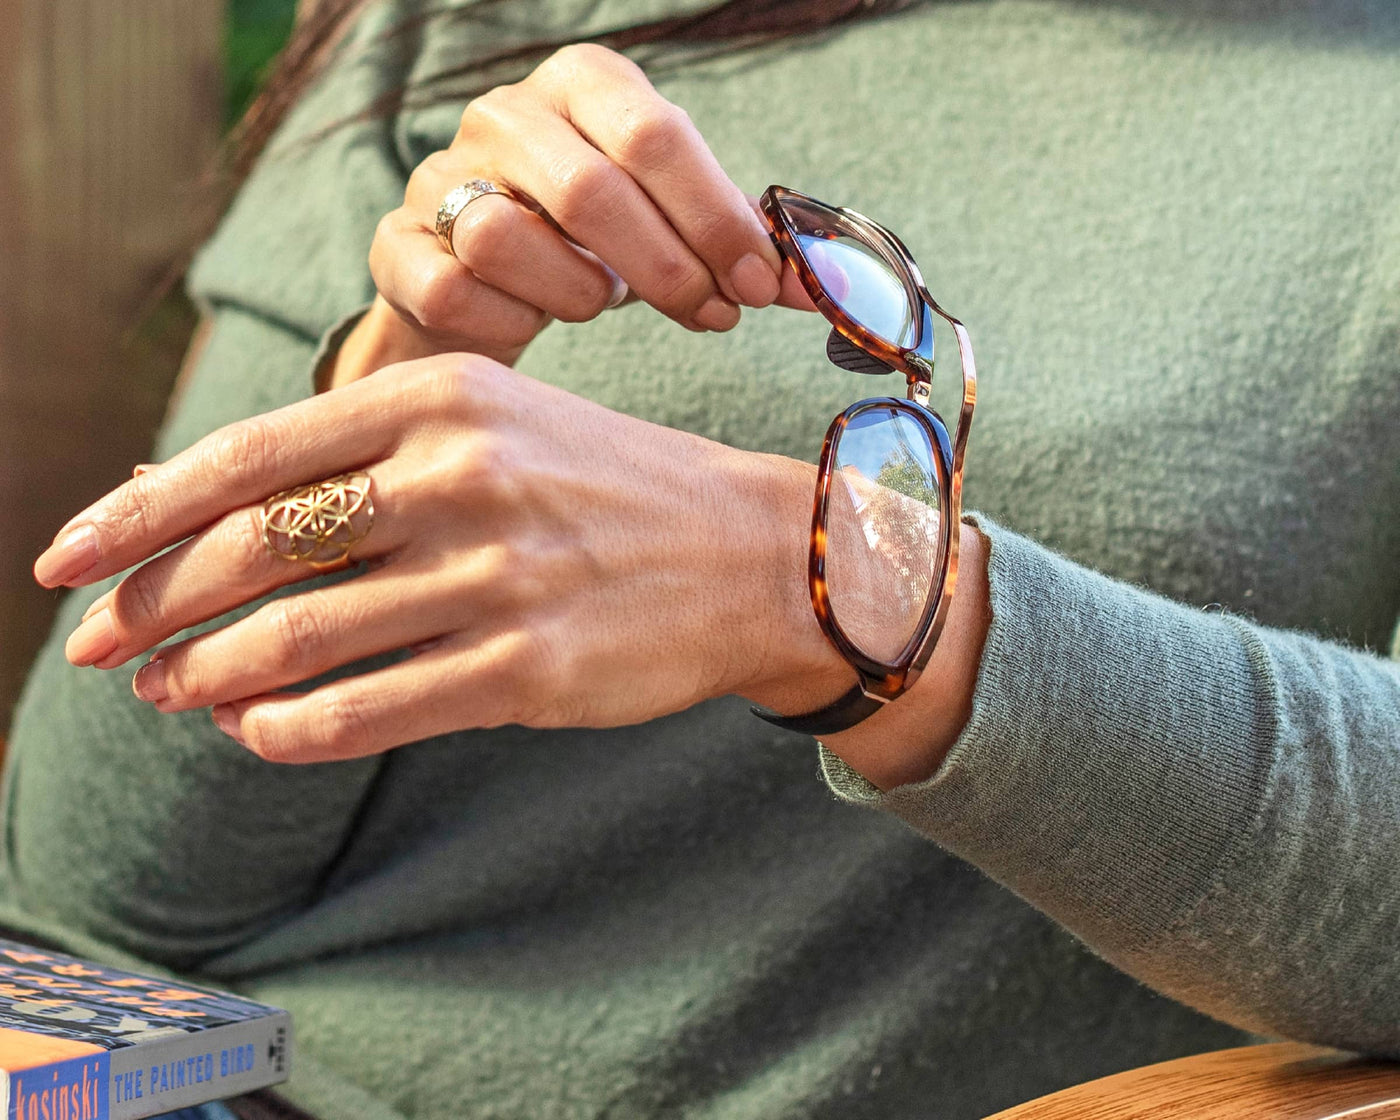 EyeWris reading glasses wrap around your wrist so that they are always within reach. The most convenient, portable, and fun folding readers you'll ever own.